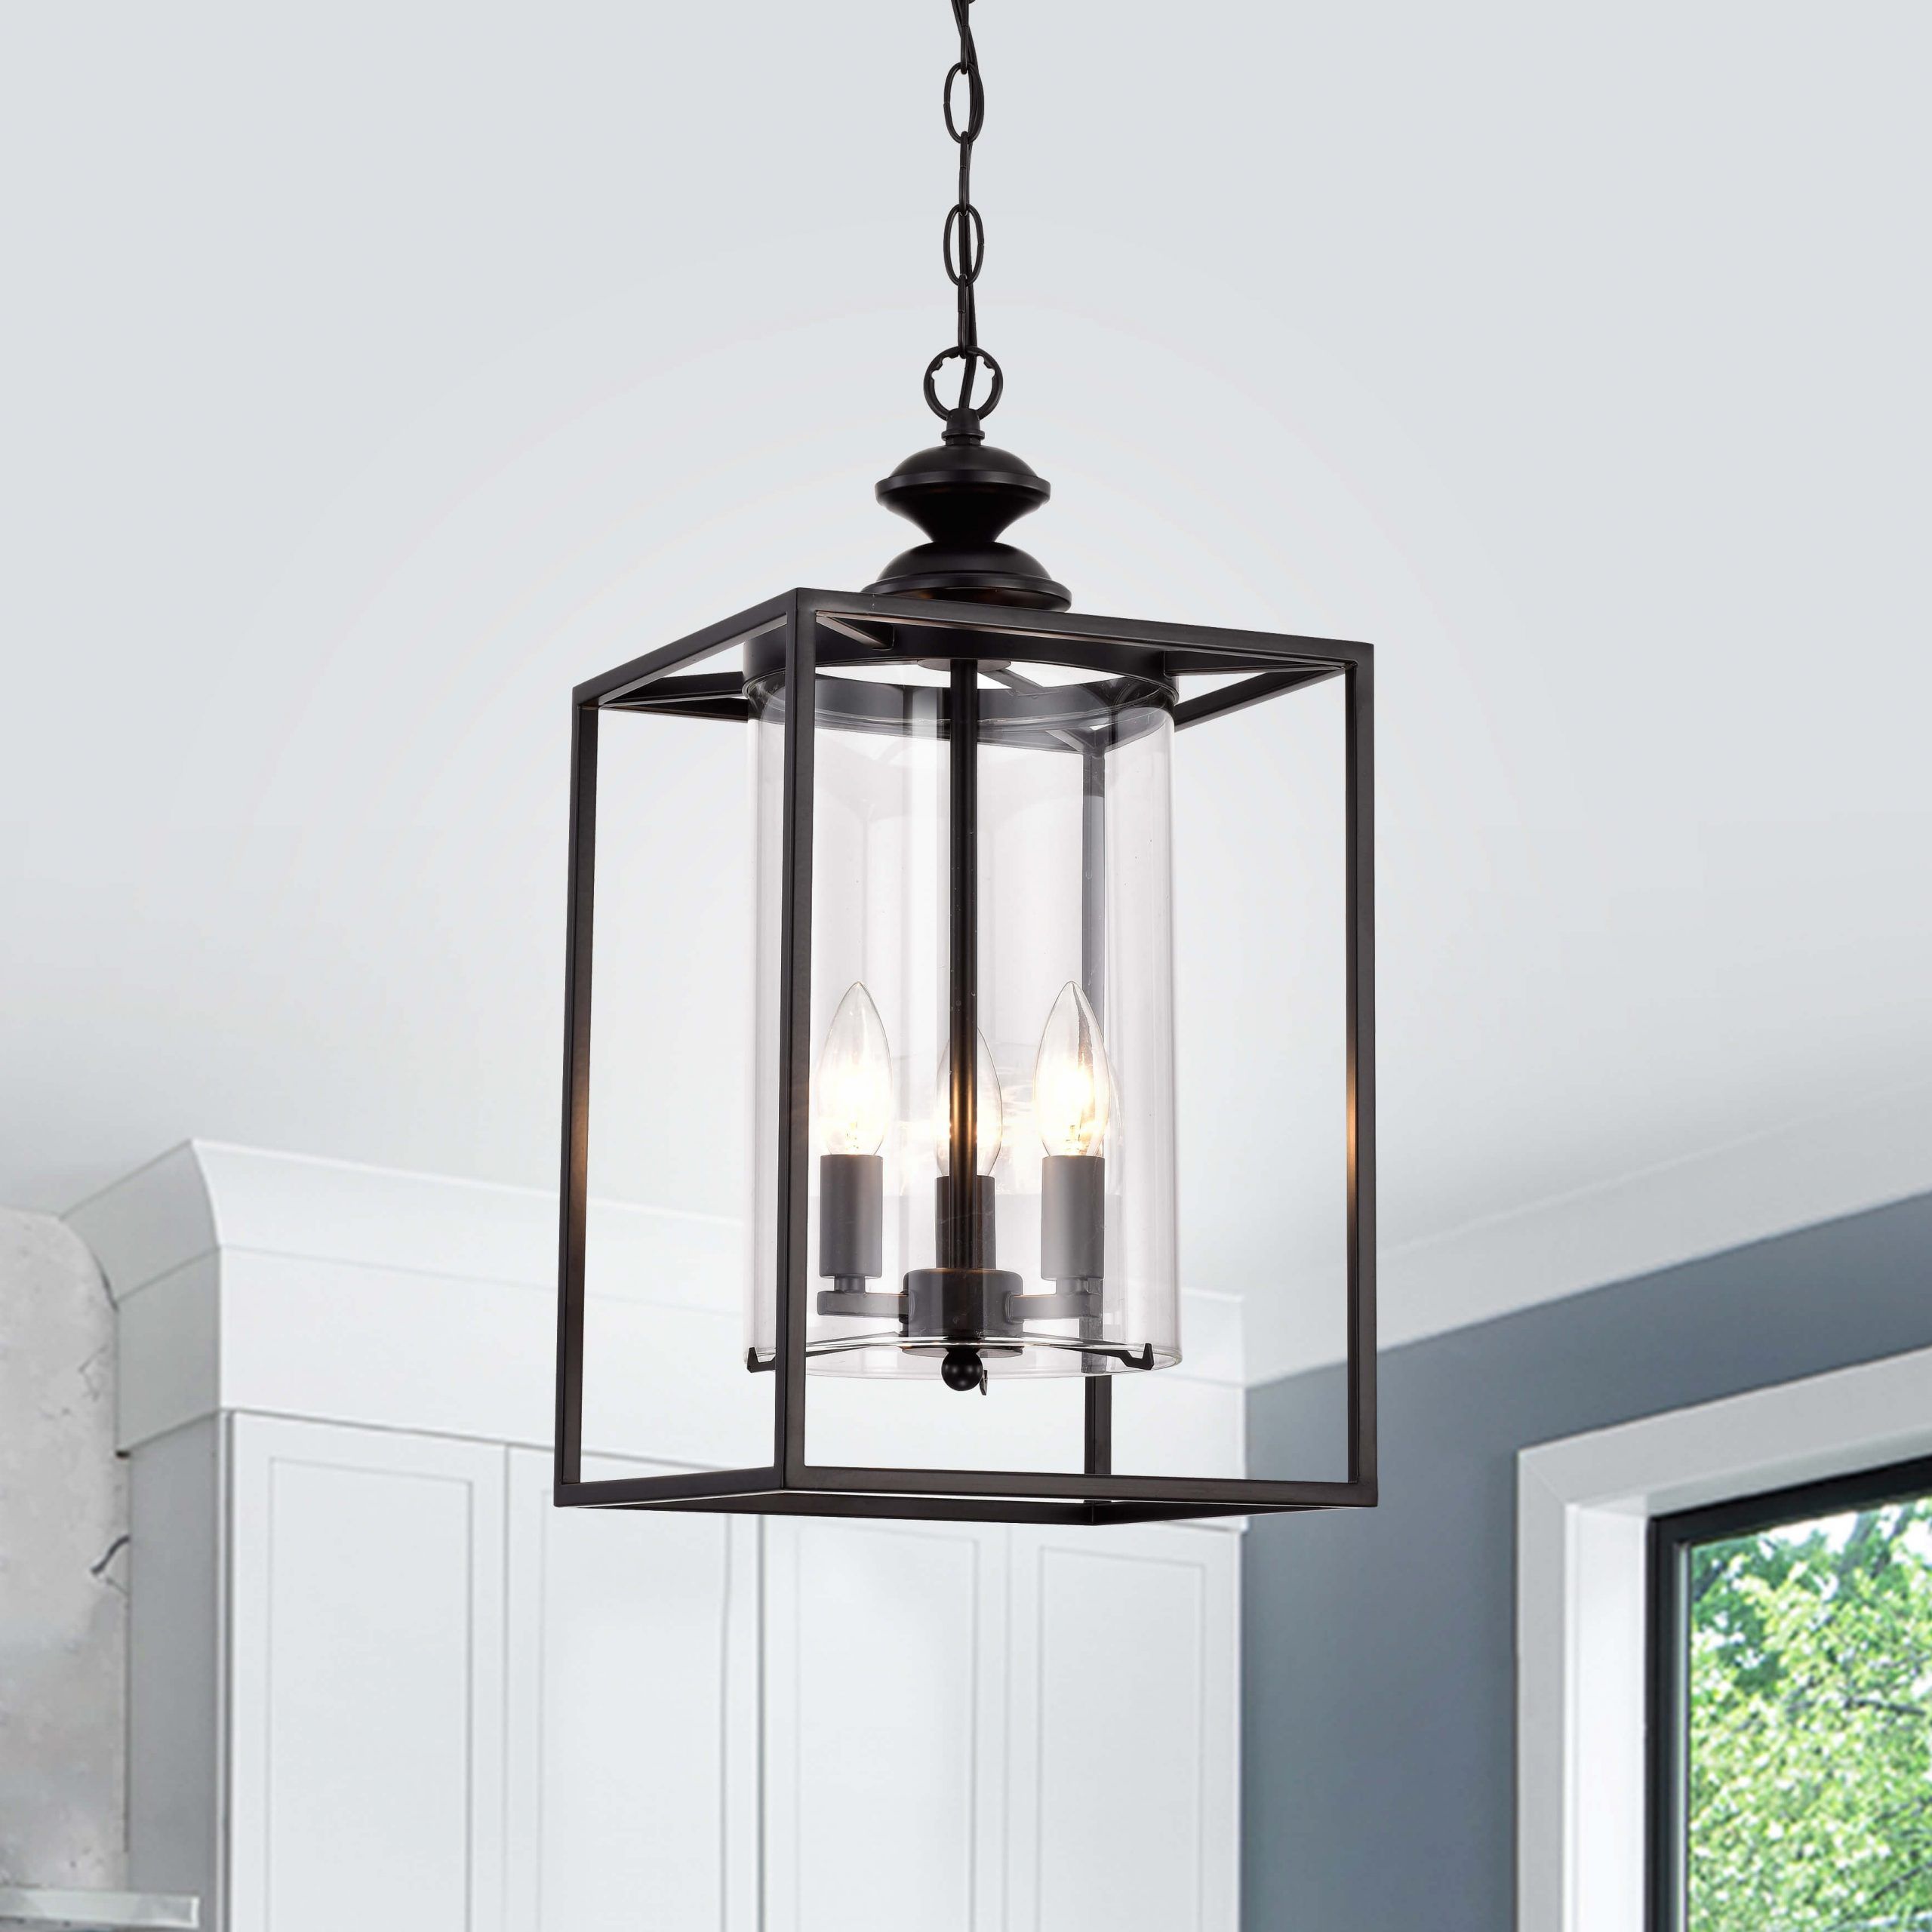 Marta Antique Black 3 Light Glass And Metal Lantern Pendant Chandelier – On  Sale – Overstock – 33590609 With Regard To Newest Black Iron Lantern Chandeliers (View 5 of 10)